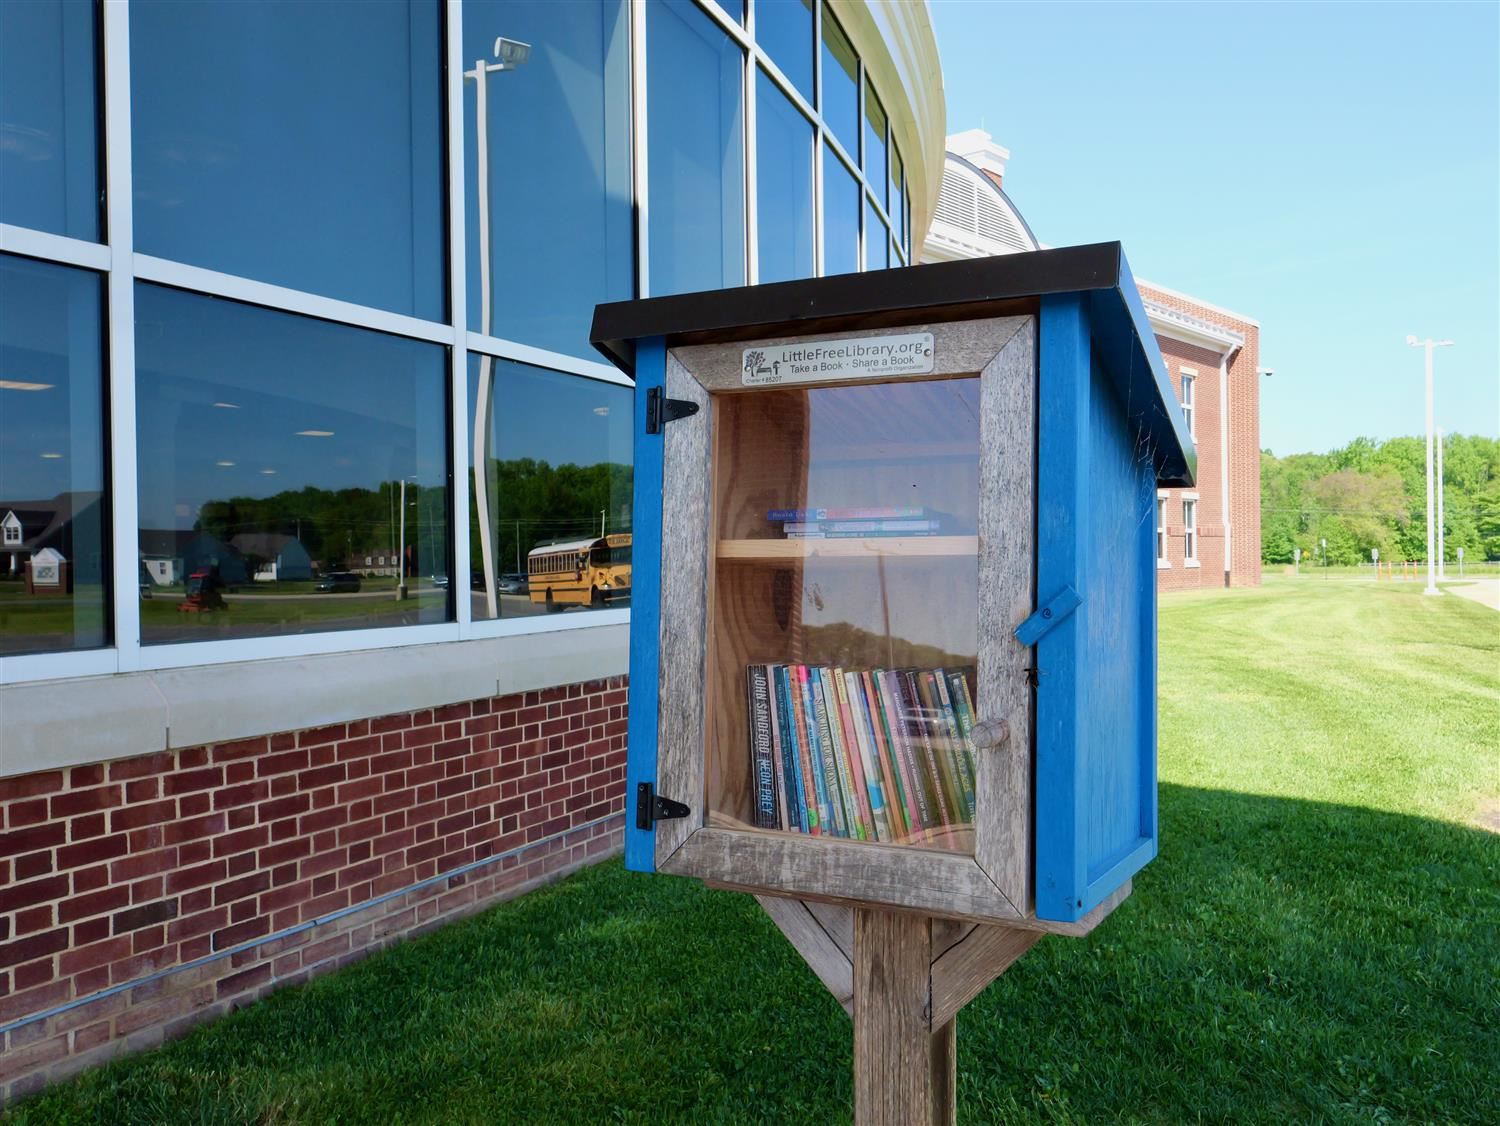 CIS Little Free Library